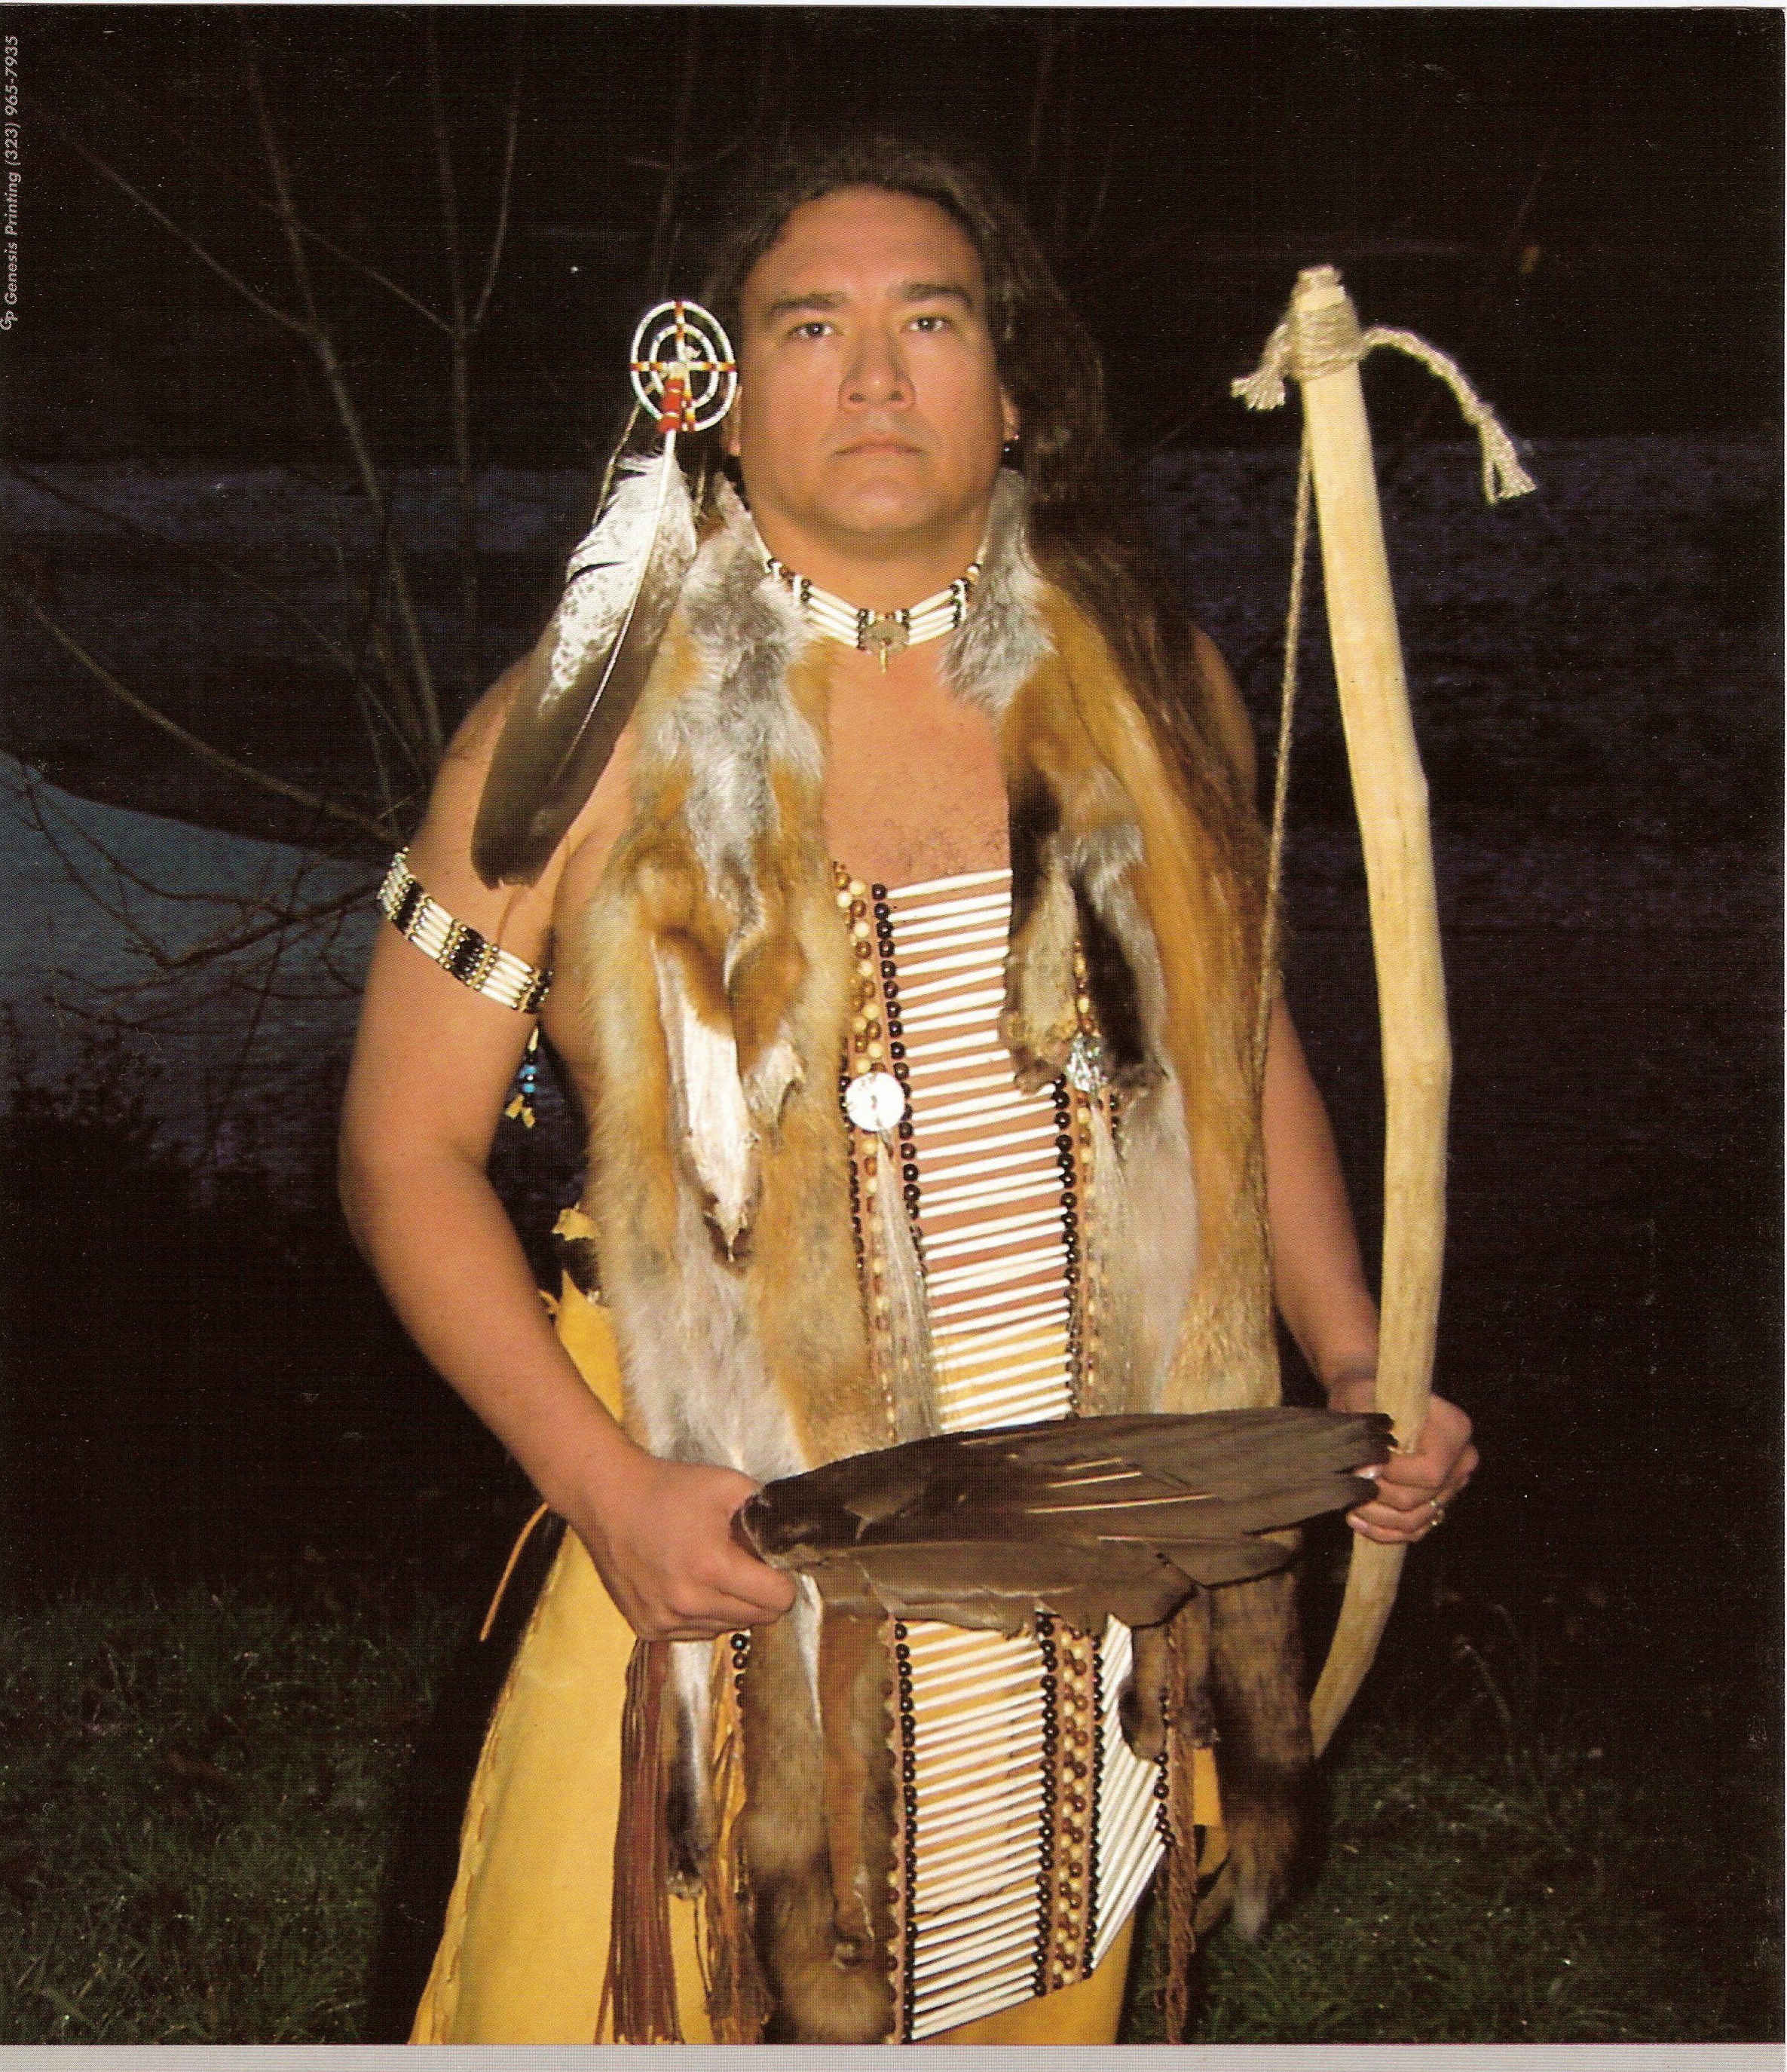 Jim in traditional outfit. Hoopa Reservation.